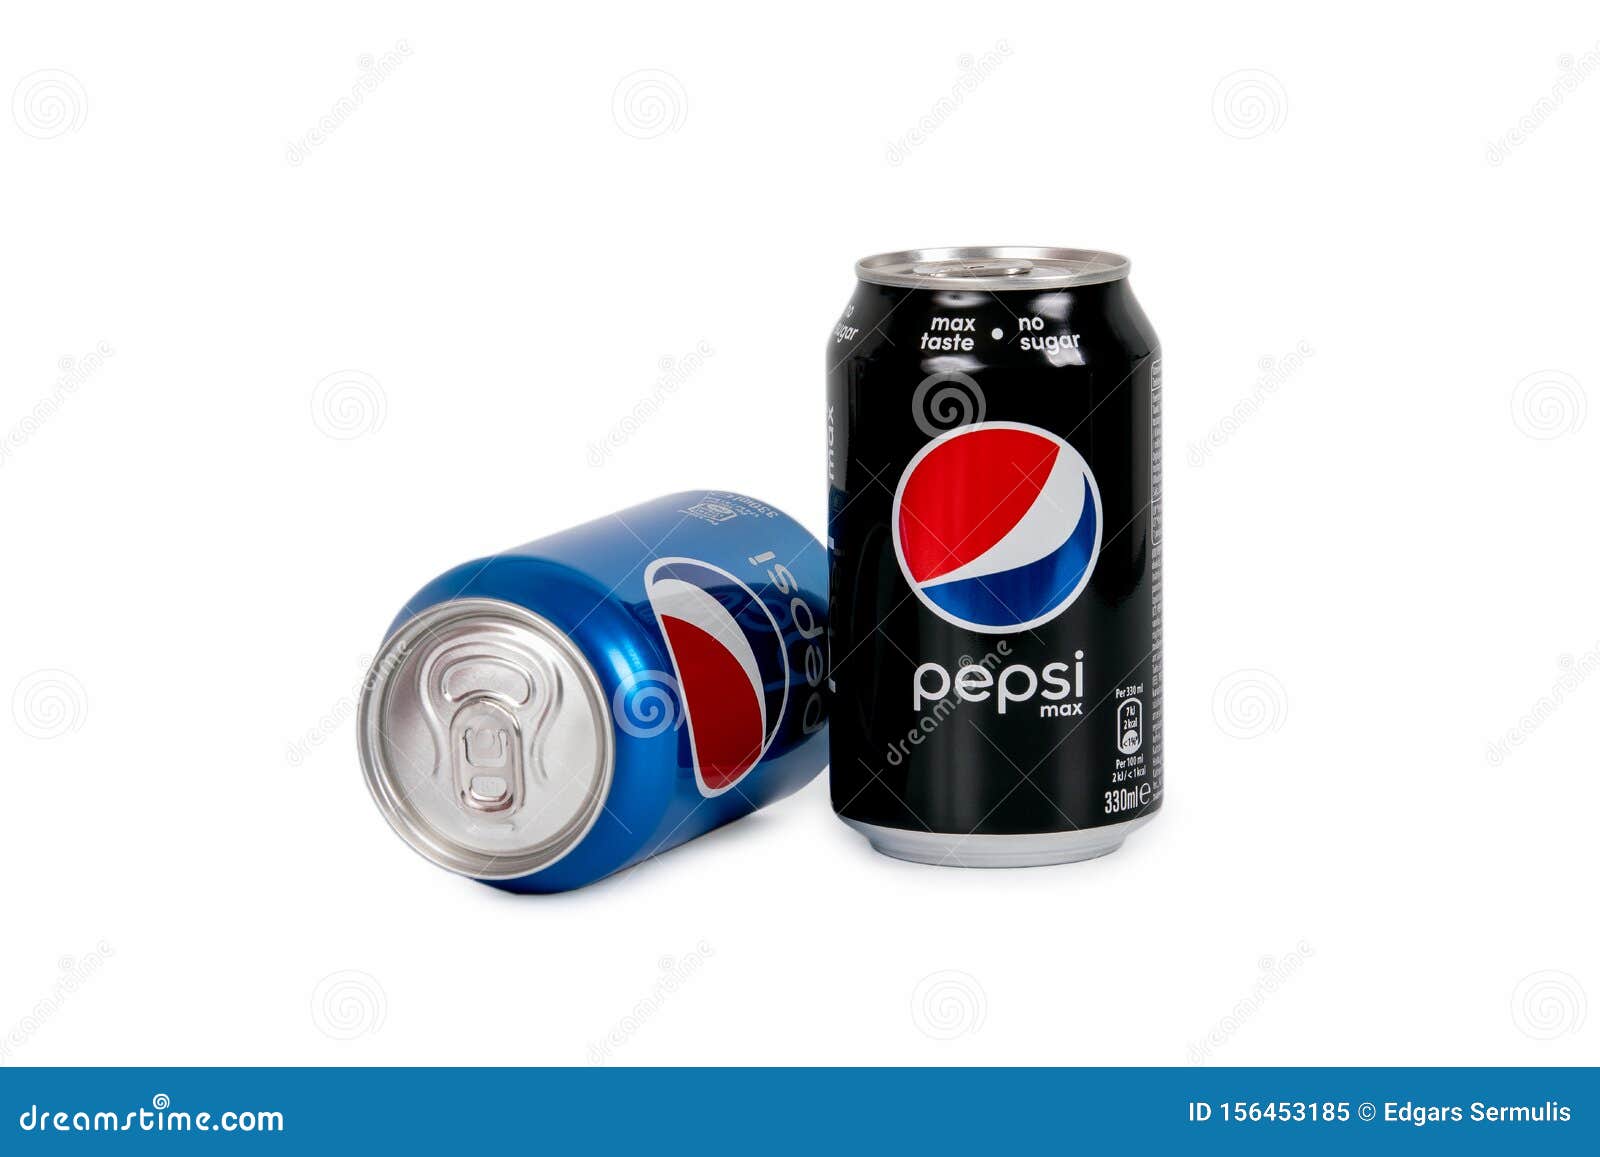 330ml Pepsi With Sugar And No Sugar Can Isolated On White Background ...